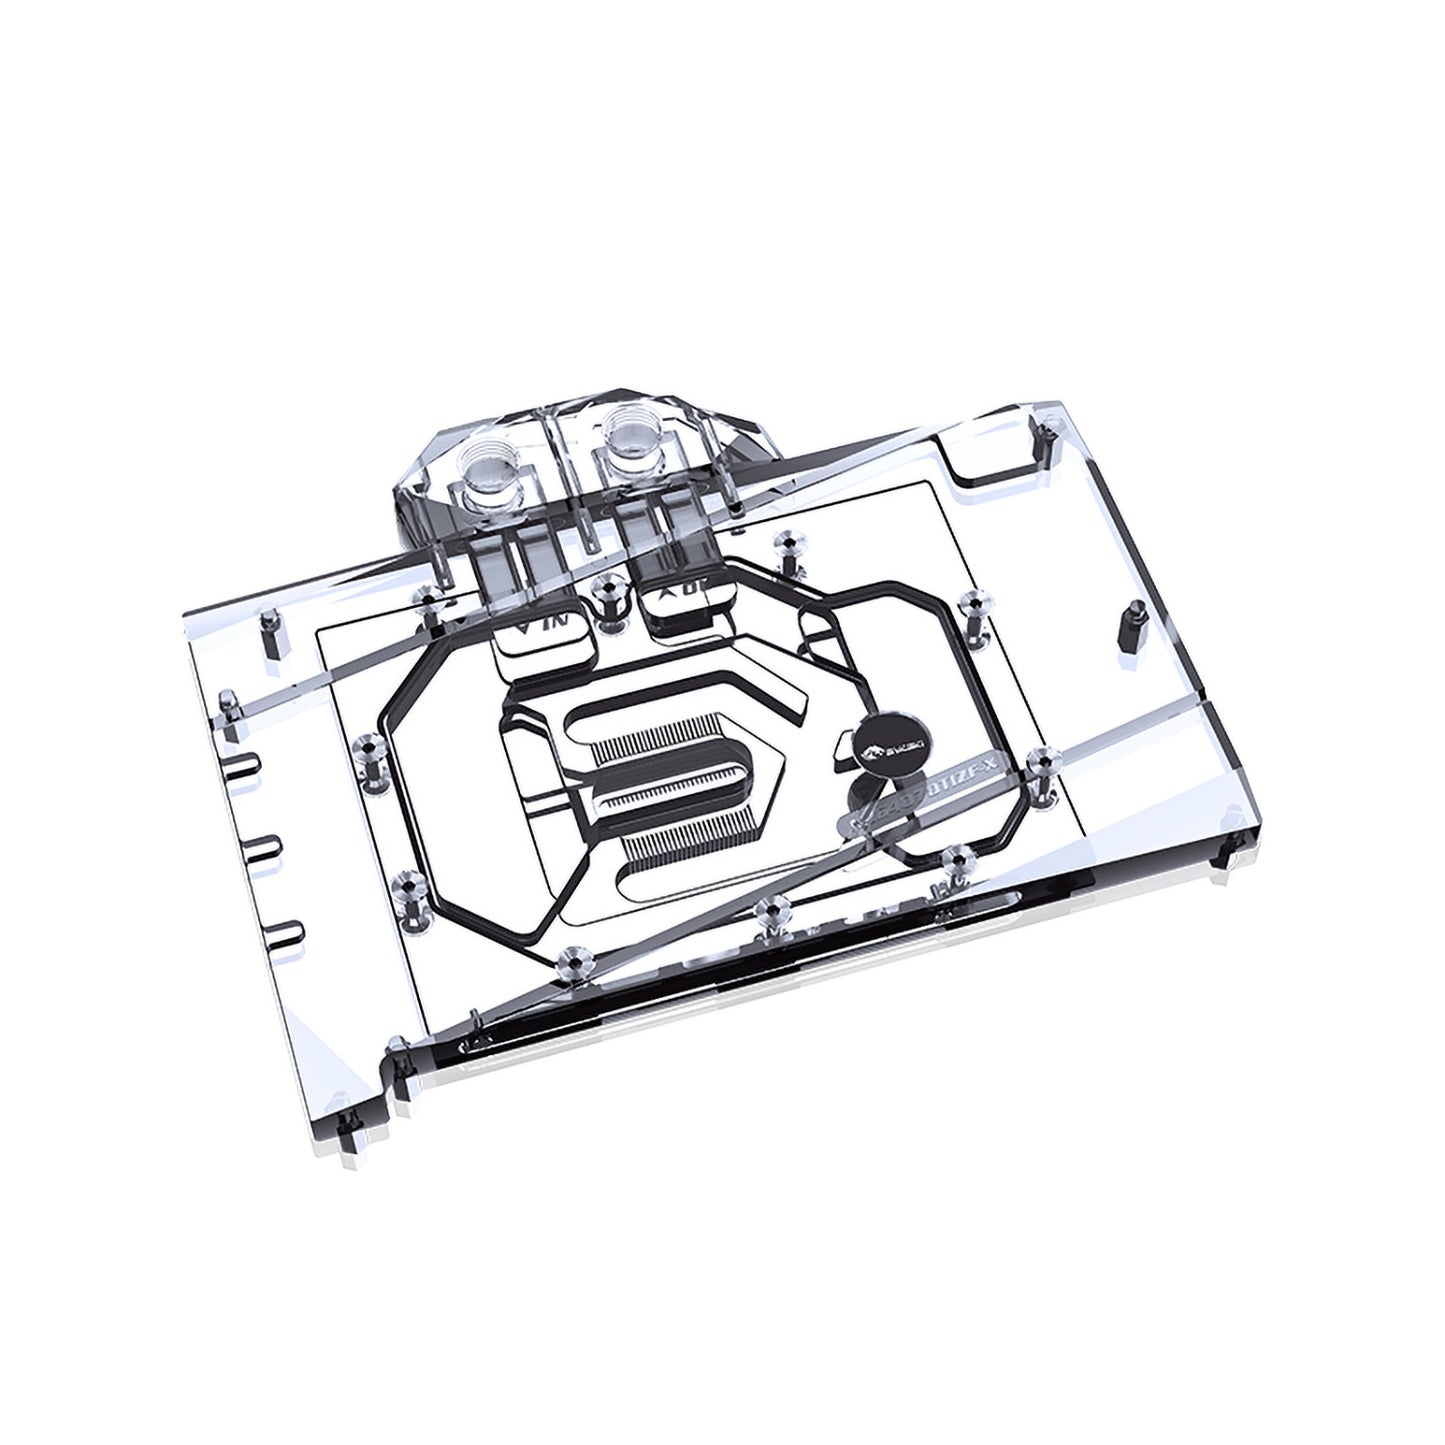 Bykski GPU Water Block For Colorful RTX 4070 Ti Battle-AX, Full Cover With Backplate PC Water Cooling Cooler, N-IG4070TIZF-X